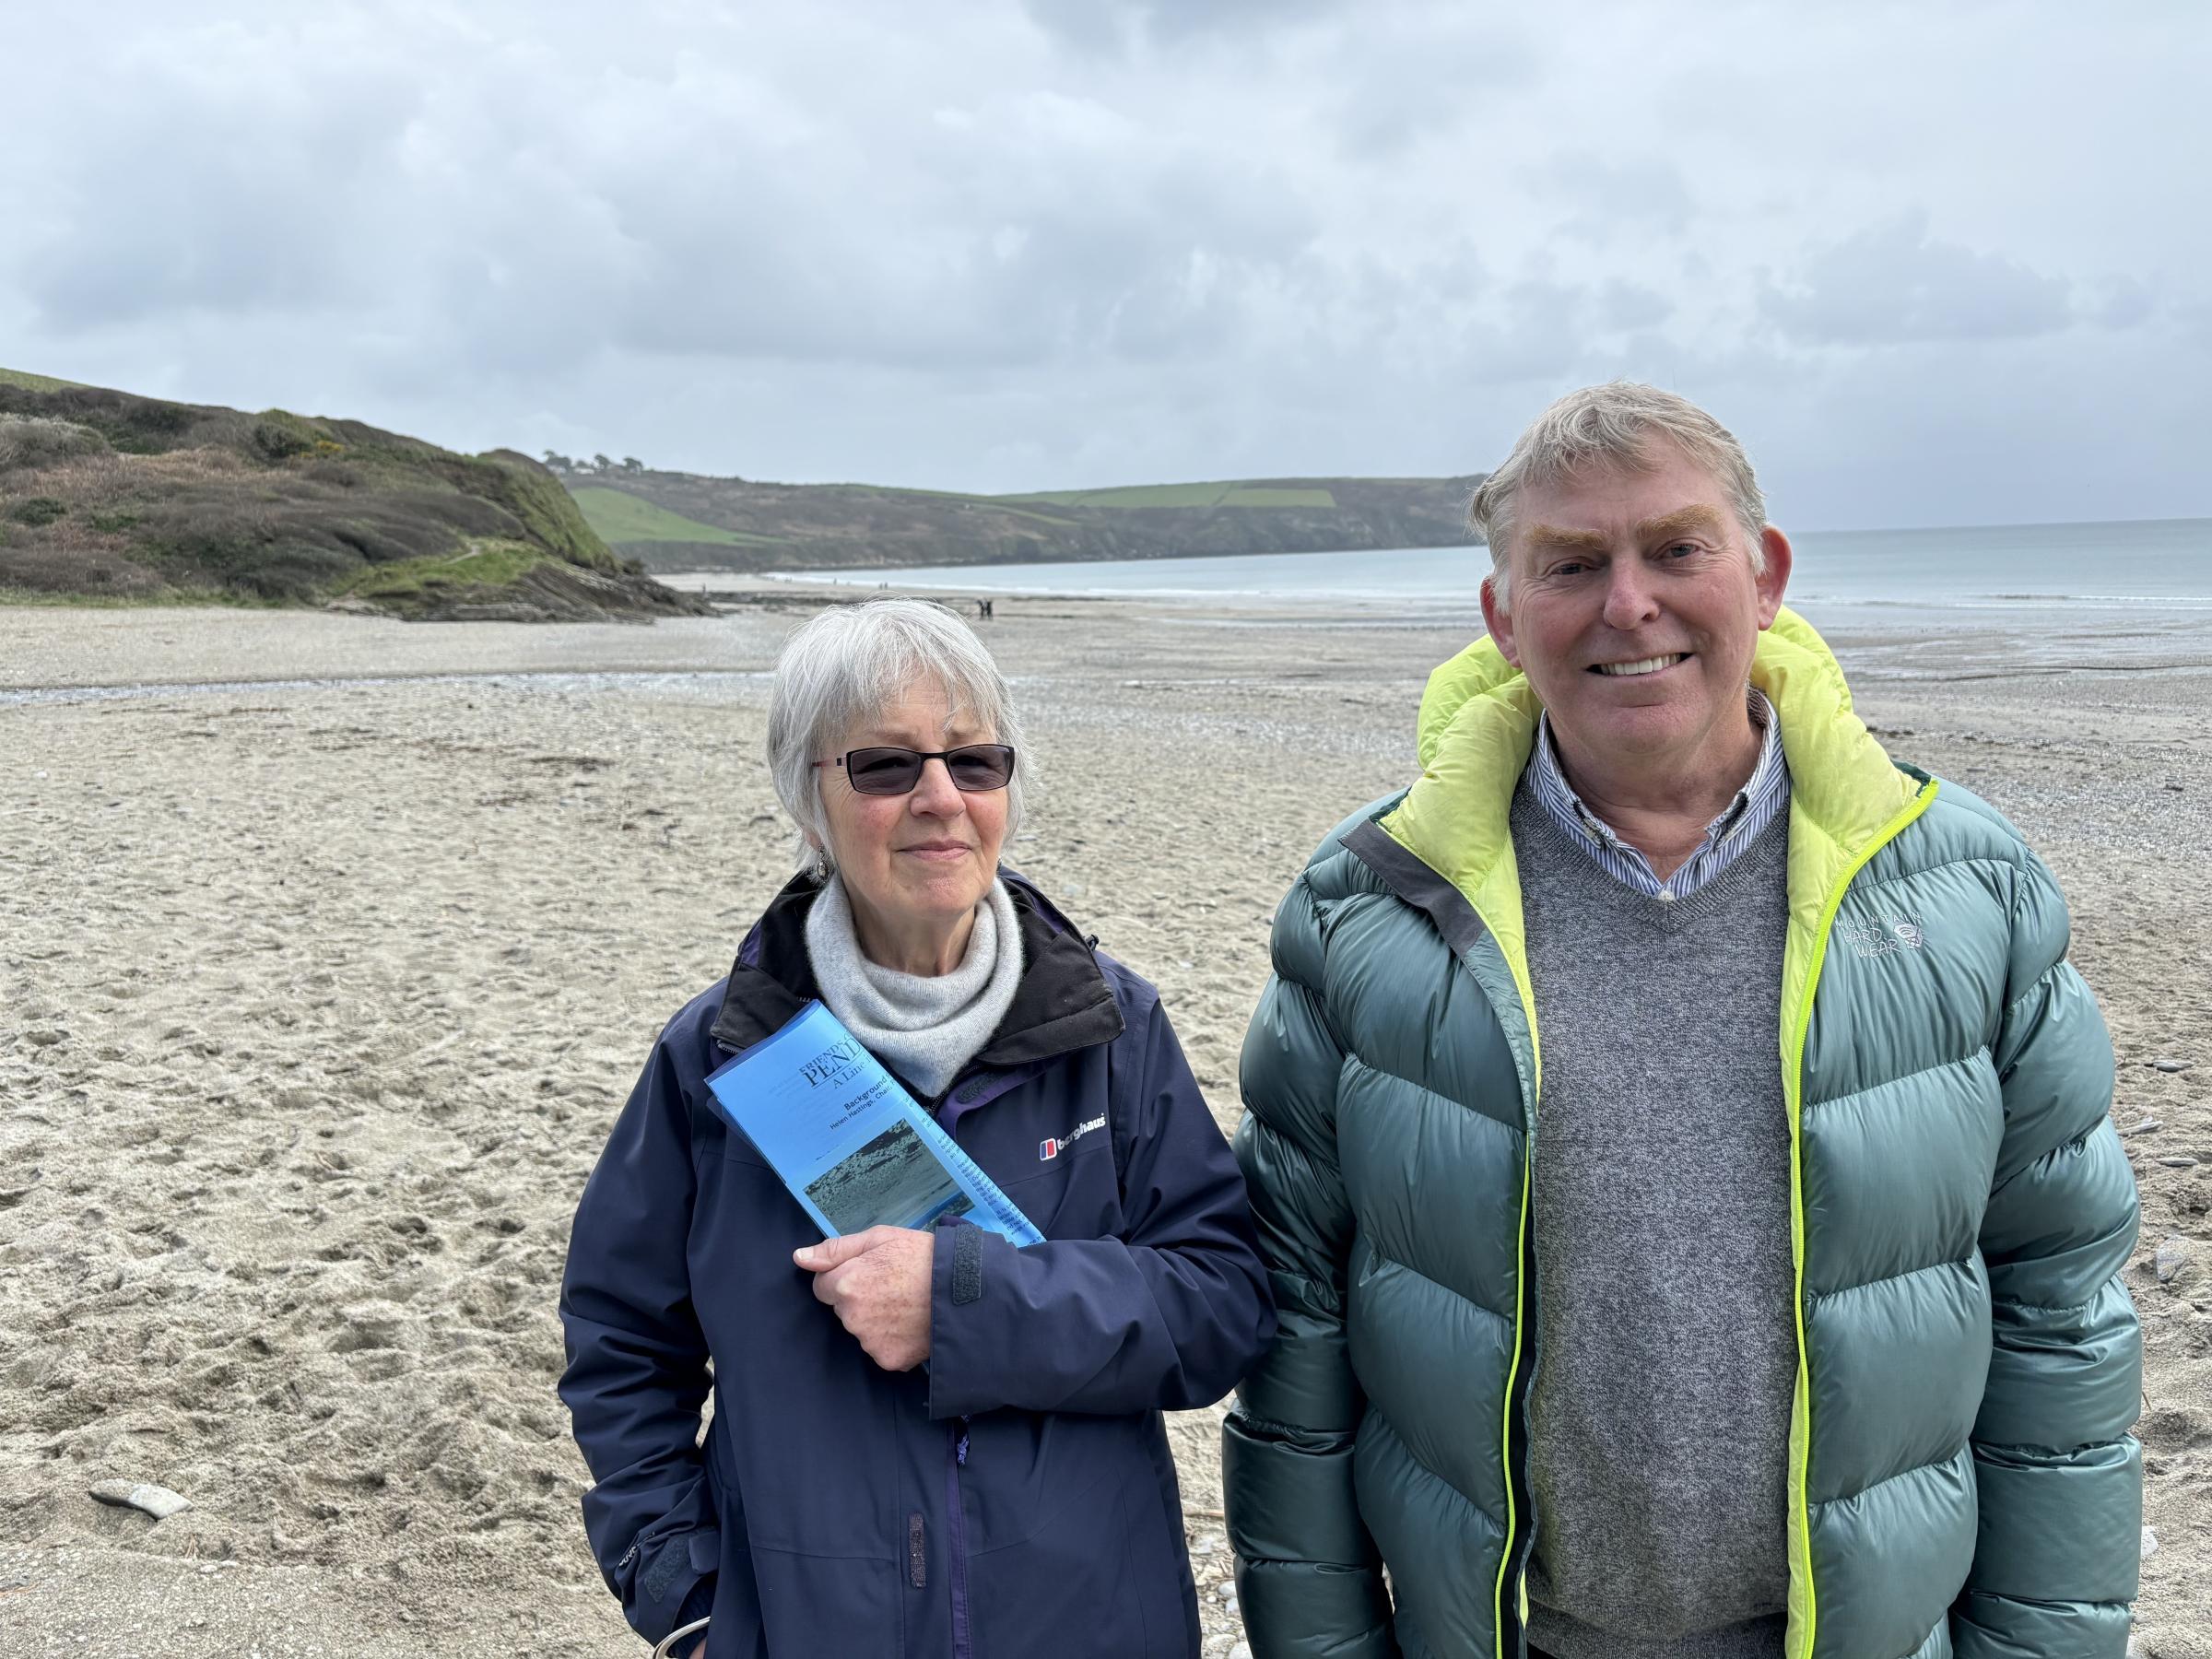 Simon Fielder and Helen Hastings, of the Friends of Pendower Beach, on the beach they want to see remain unspoiled (Pic: Lee Trewhela / LDRS)